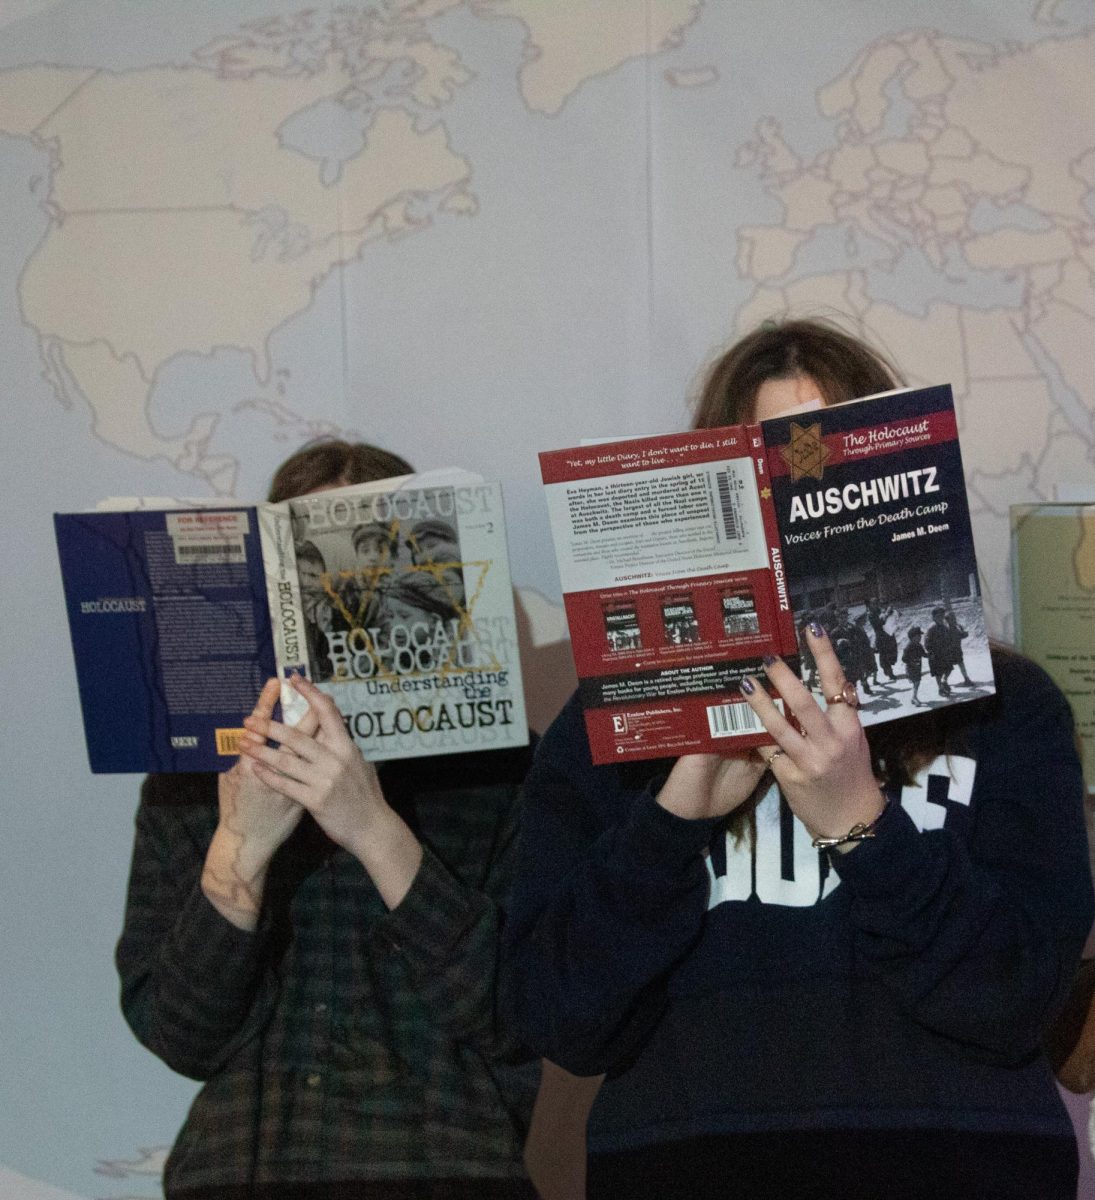 Students+reading+books+about+the+Holocaust.